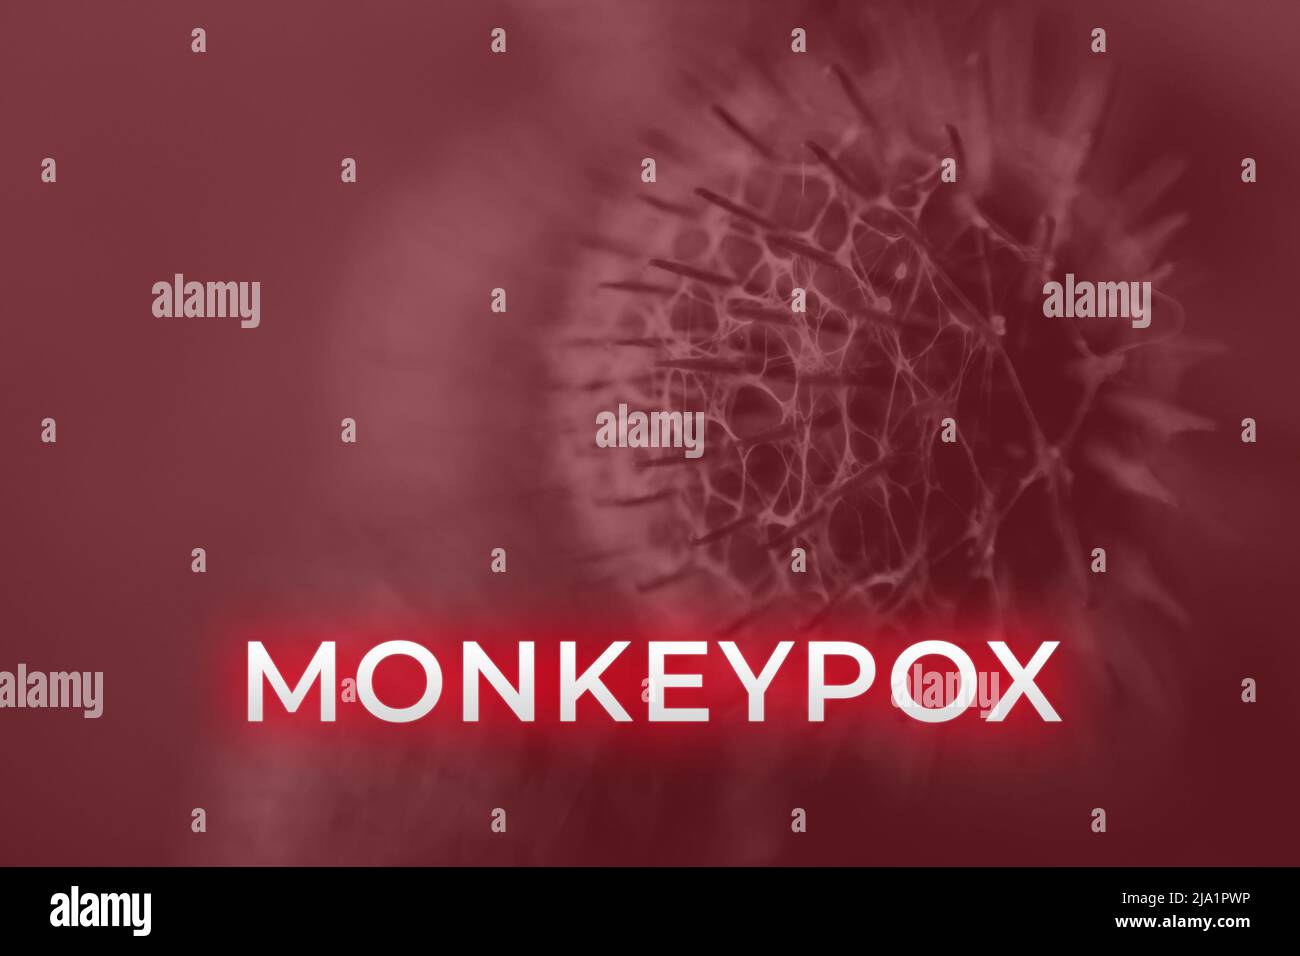 Monkeypox virus. Red background. Outbreak concept. Virus transmitted to humans from animals. Monkeys may harbor the virus and infect people. New pande Stock Photo